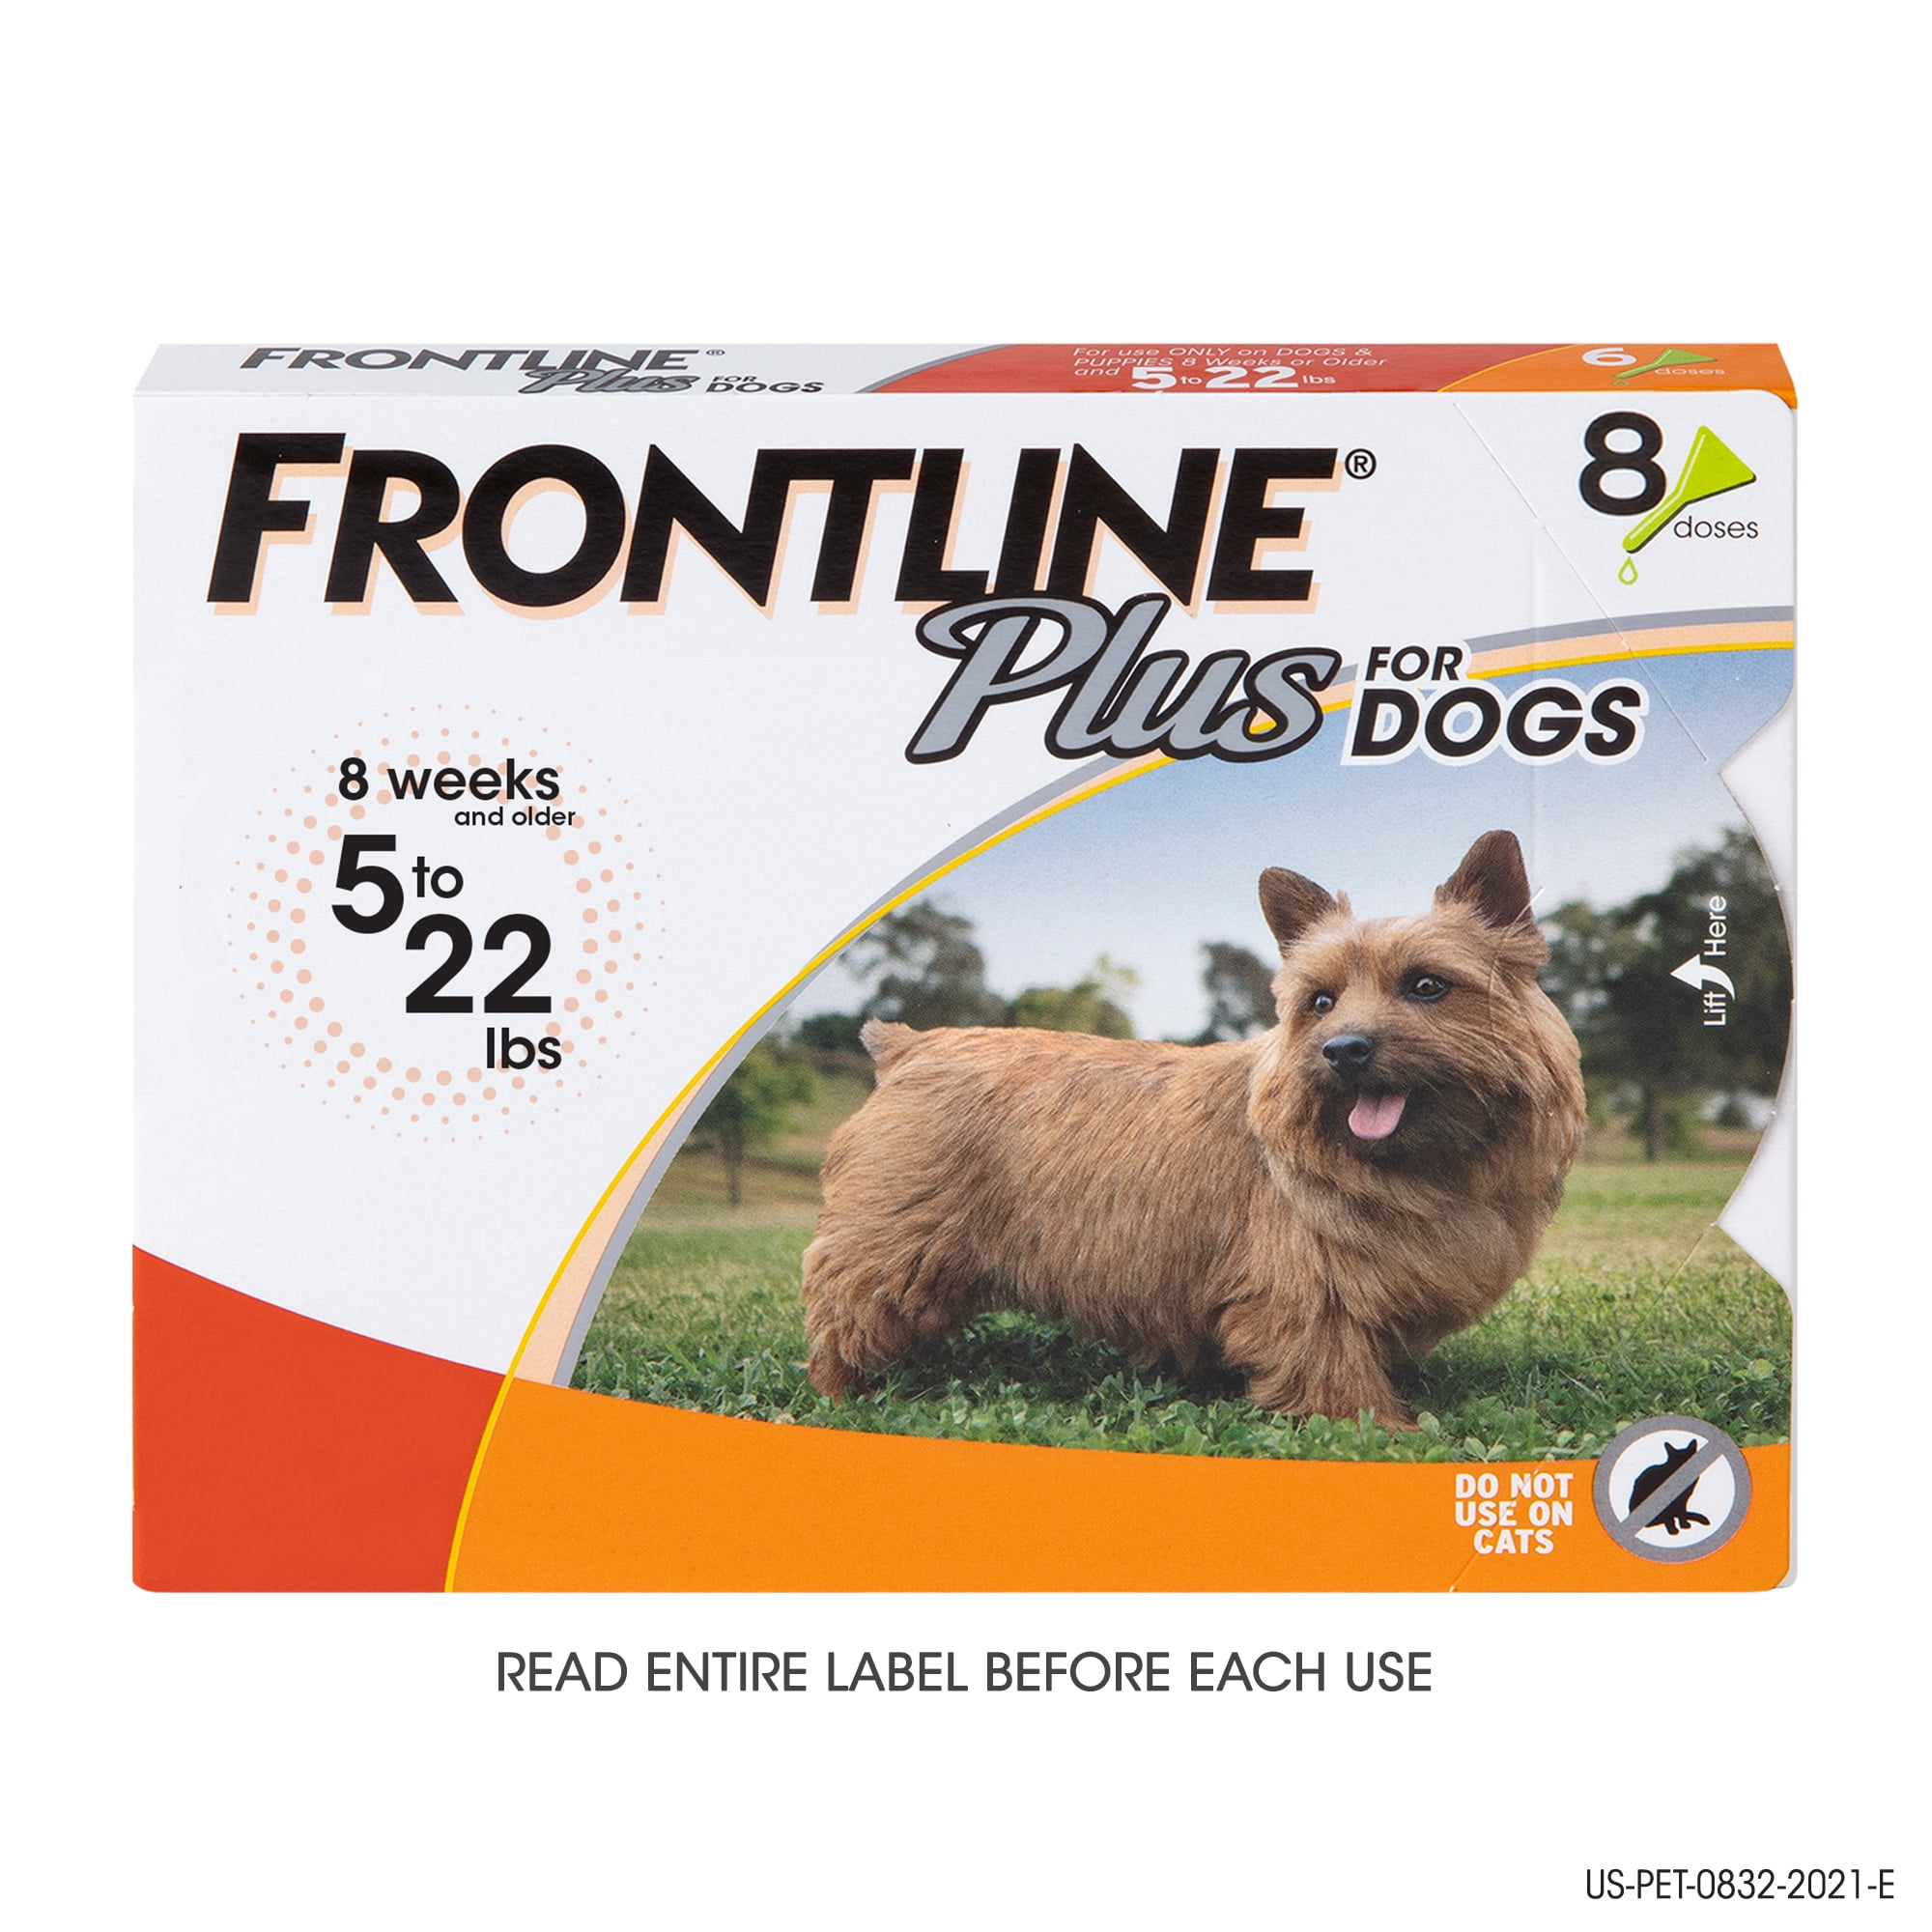 FRONTLINE Plus for Small Dog (5-22 lbs) Flea and Tick Treatment, 8 Doses